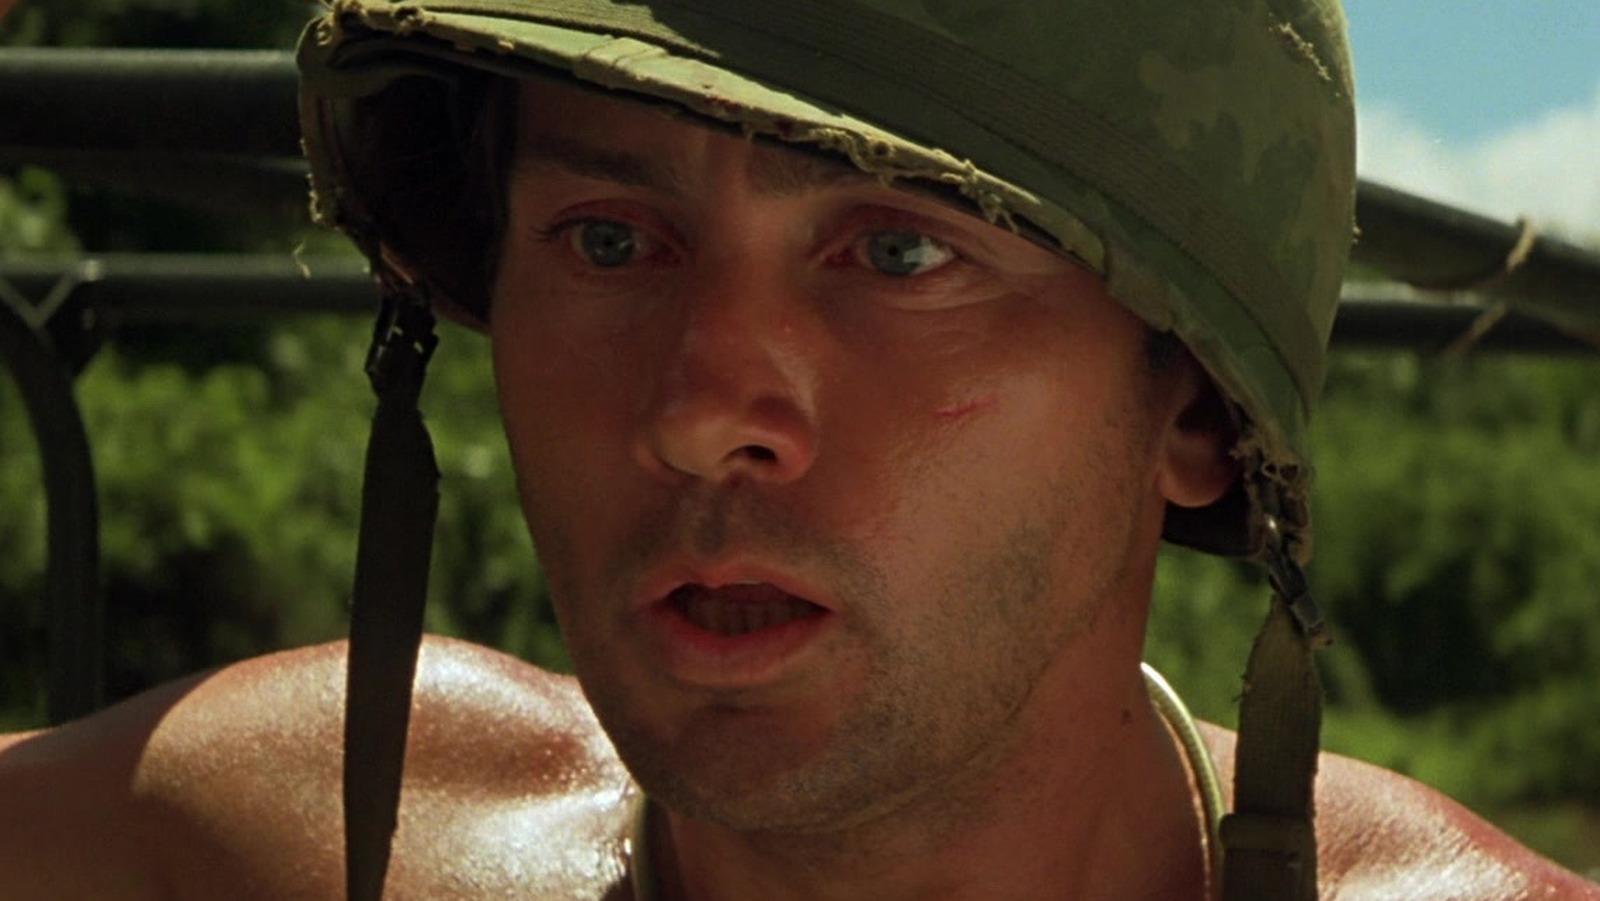 The Cinematic Masterpiece That Is Apocalypse Now